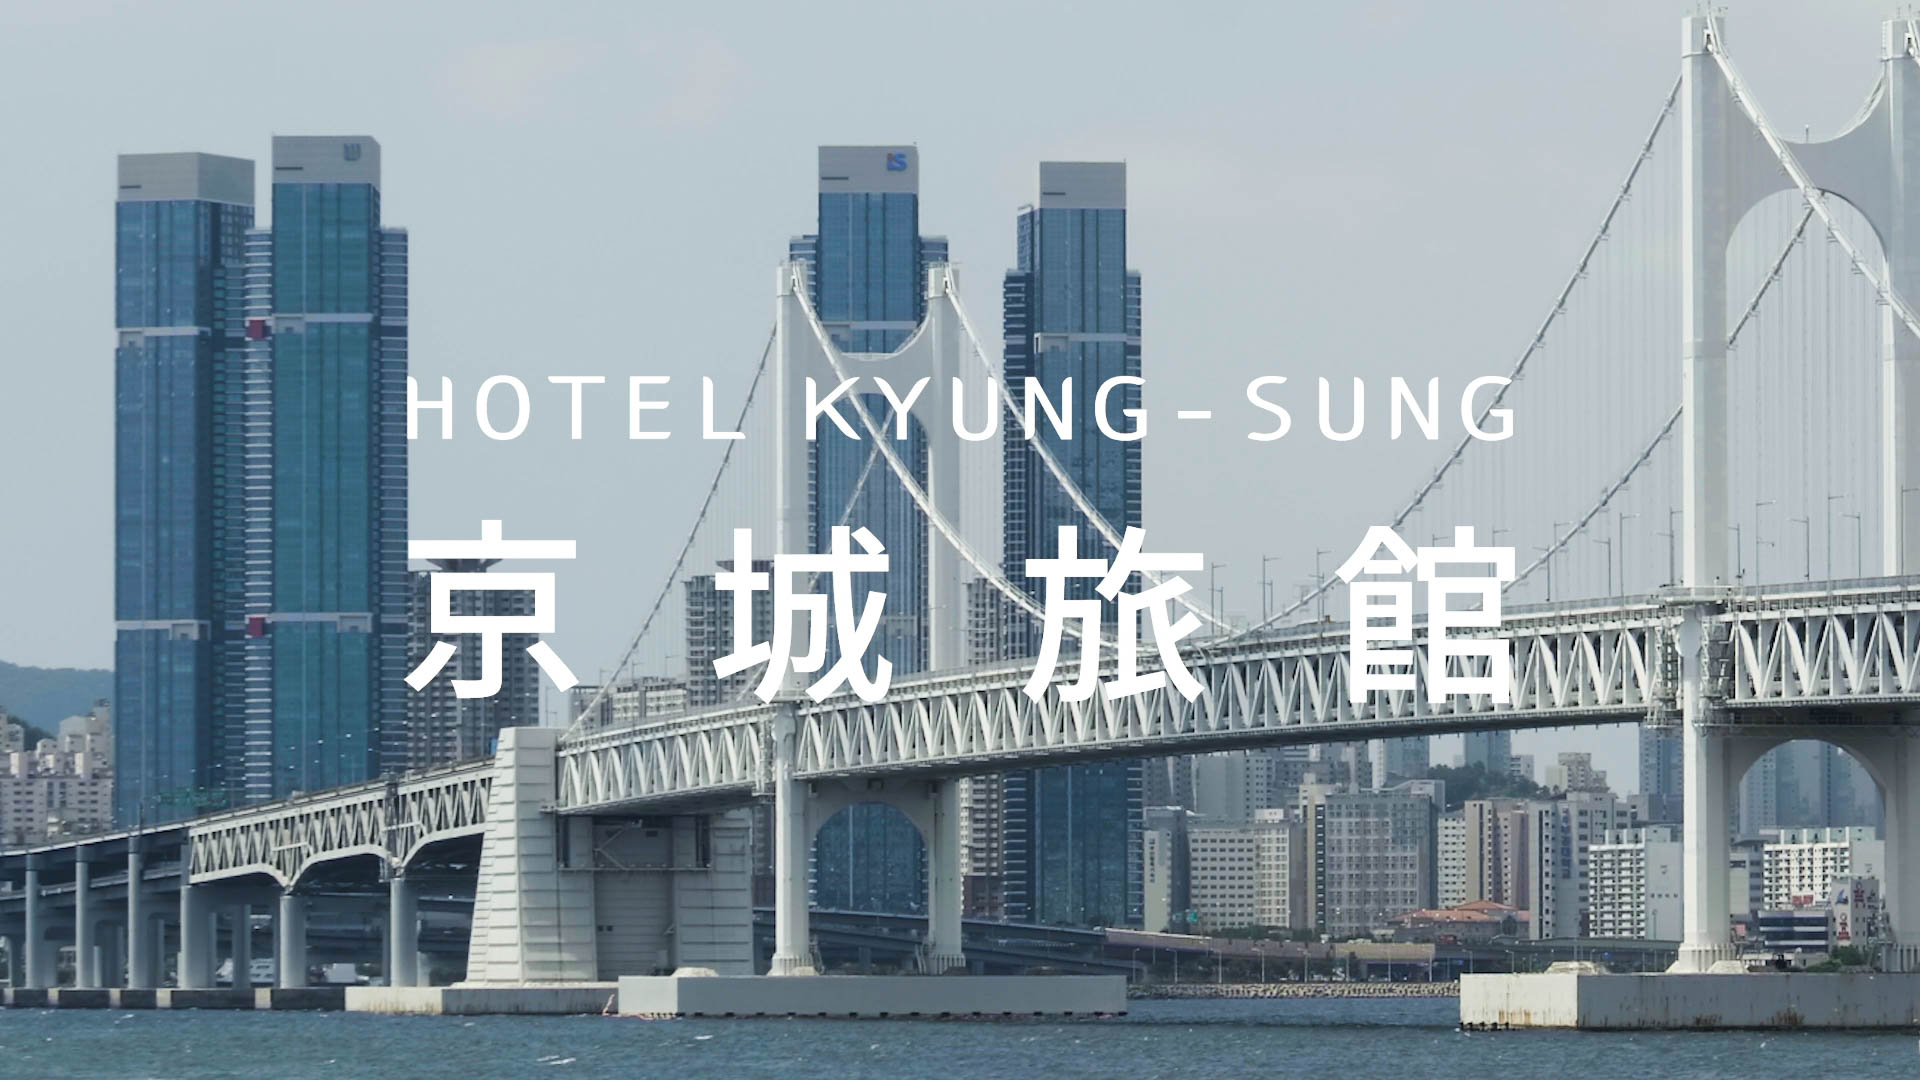 Hotel Kyung-sung Promotion Video